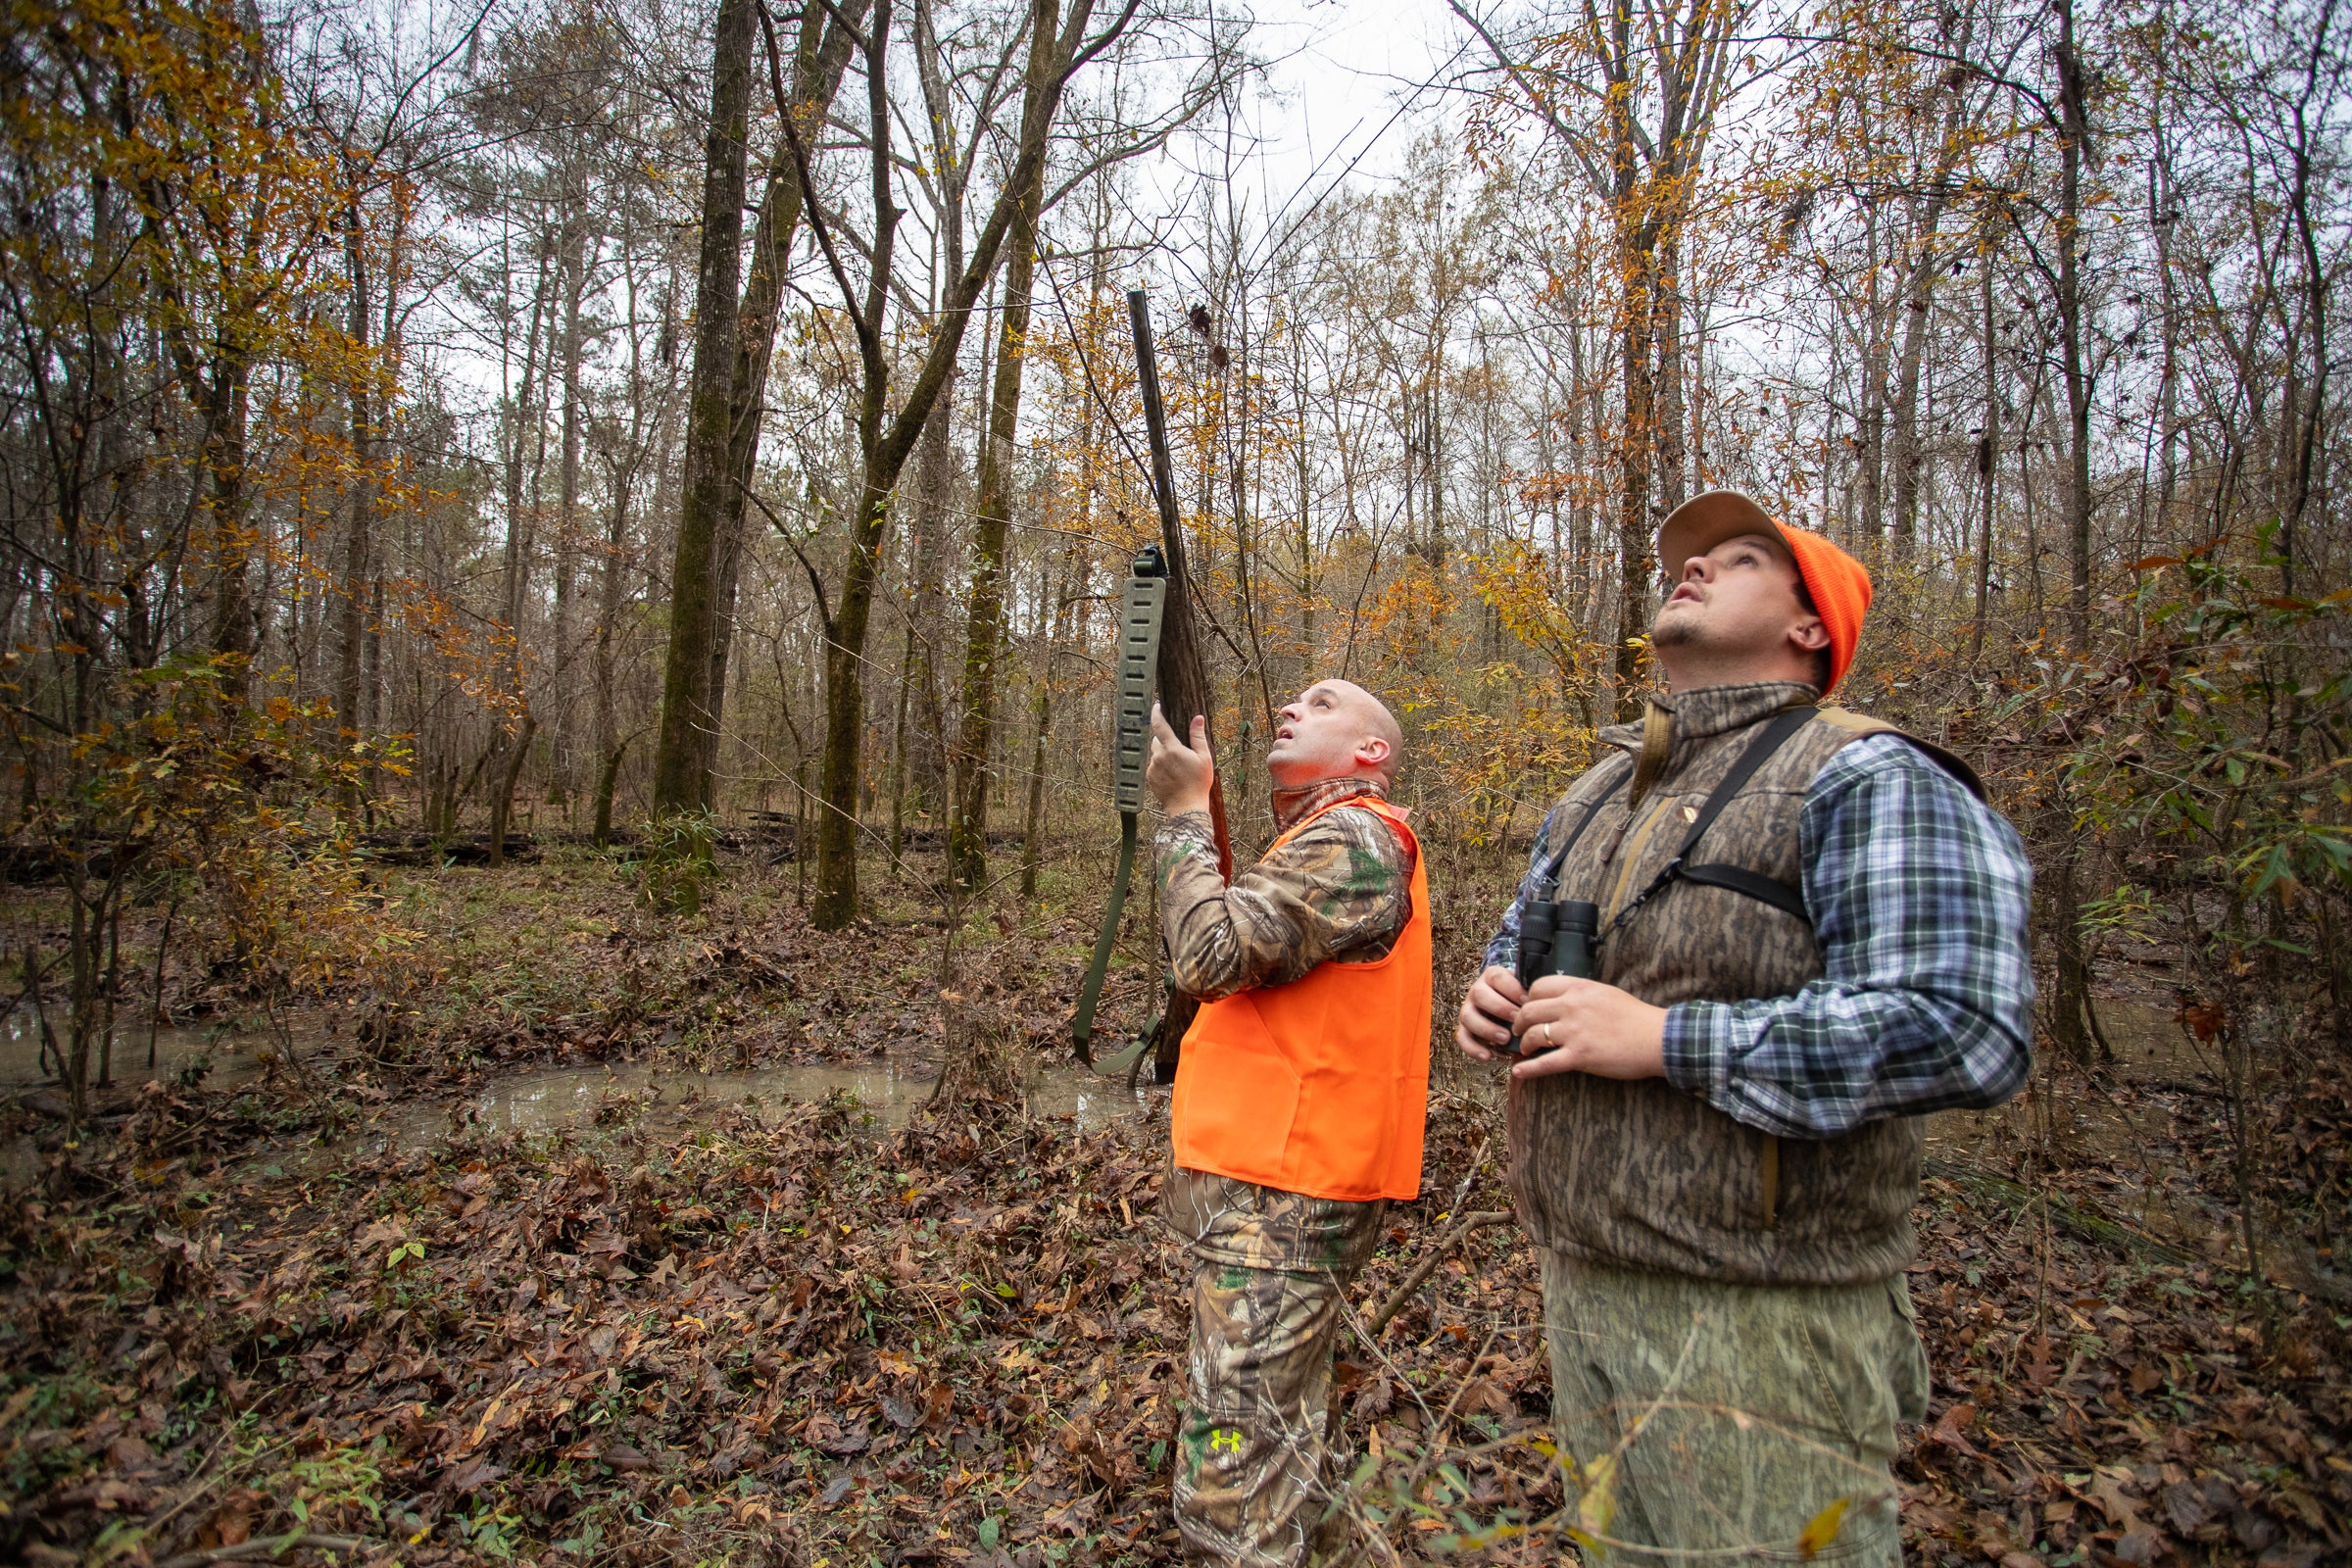 Alabama’s Hunting 101 Workshop, the First Step on Your Outdoors Journey